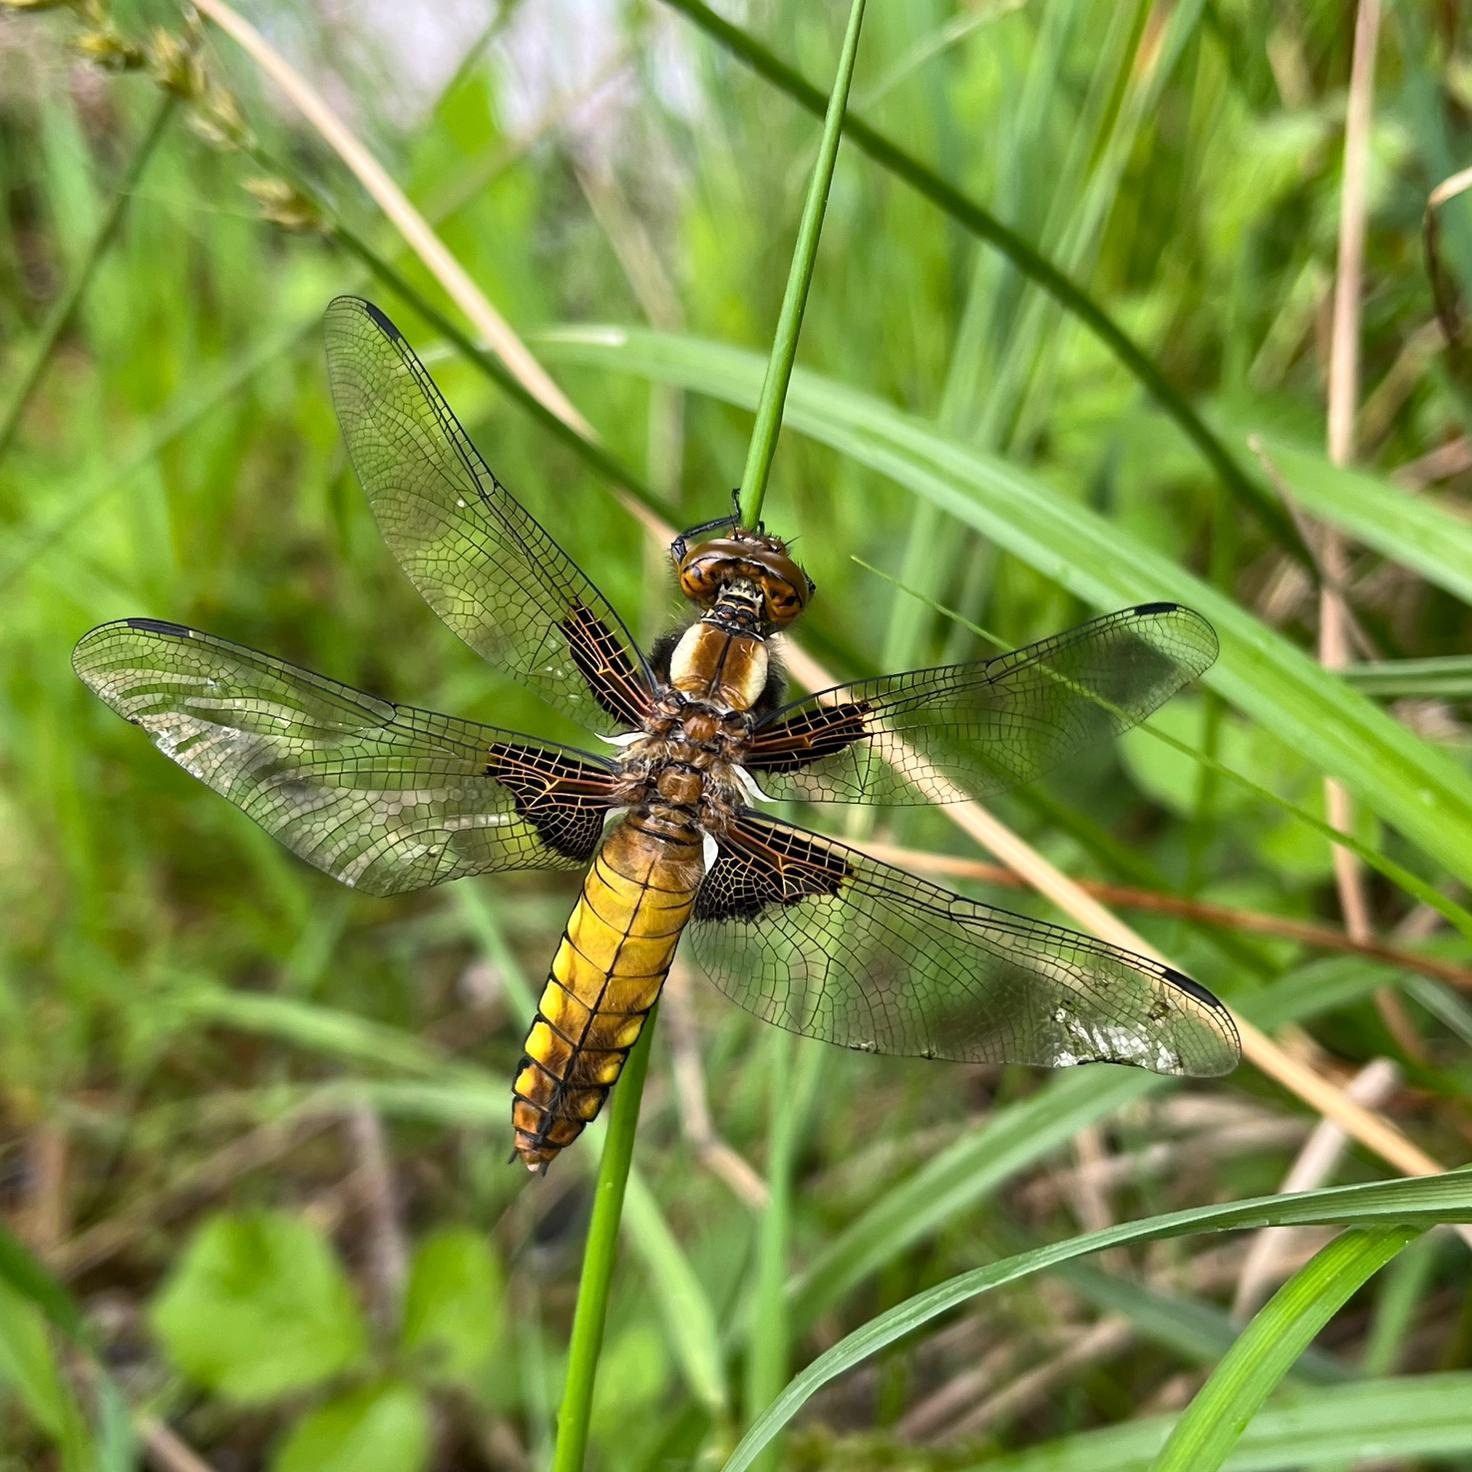 Freshly emerged broad-bodied chaser (female) at one of the Boothby ponds today. Beautifully captured by our ranger Lloyd.